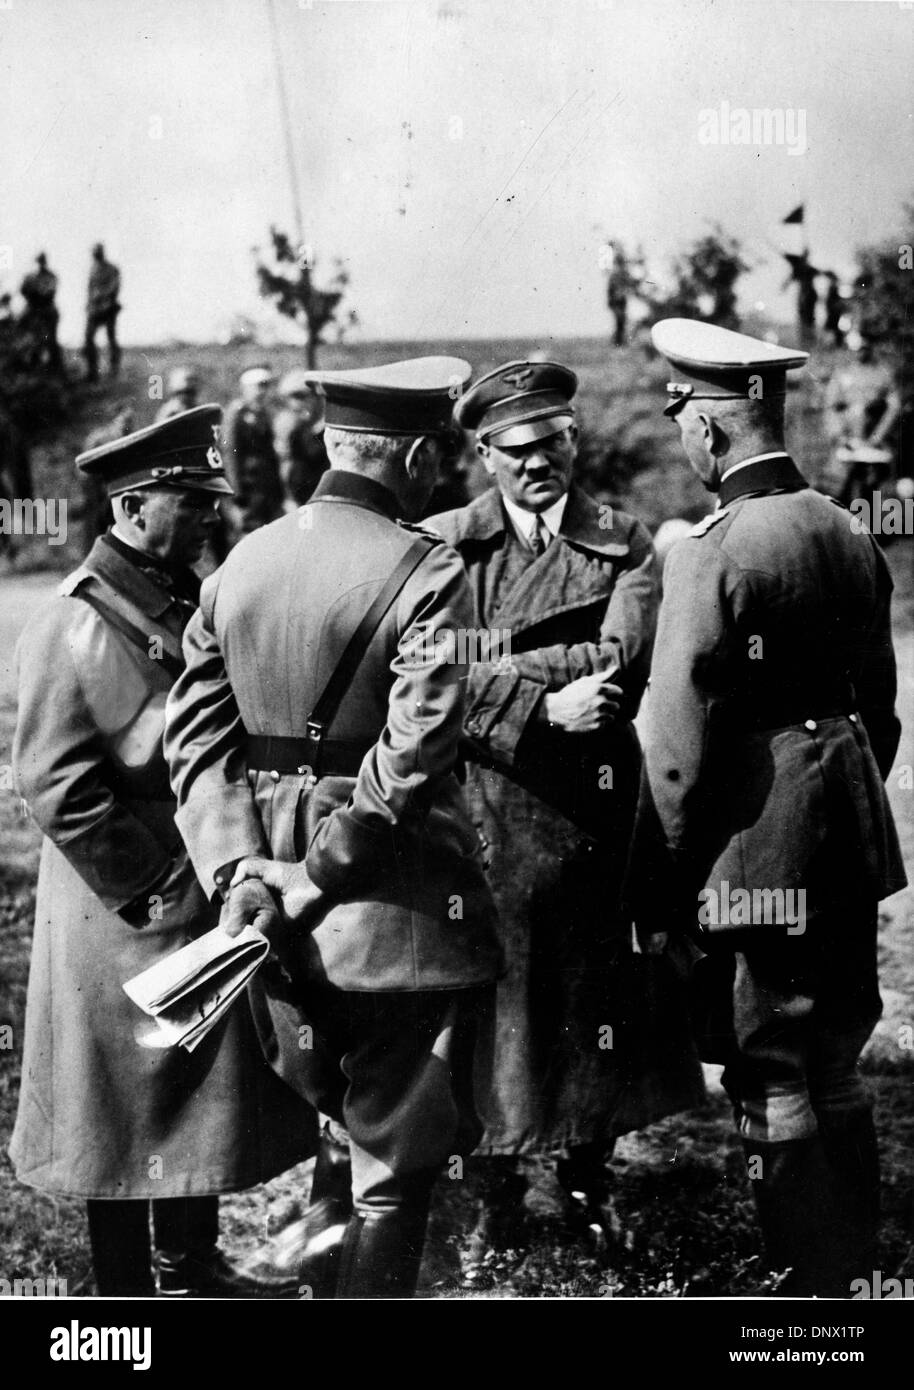 Sept. 7, 1935 - Berlin, Germany - Nazi leader and Fuhrer of Germany, ADOLF HITLER (third from left) talking with generals Von Fritsch, Von Blomberg and Liebman. (Credit Image: © KEYSTONE Pictures USA/ZUMAPRESS.com) Stock Photo